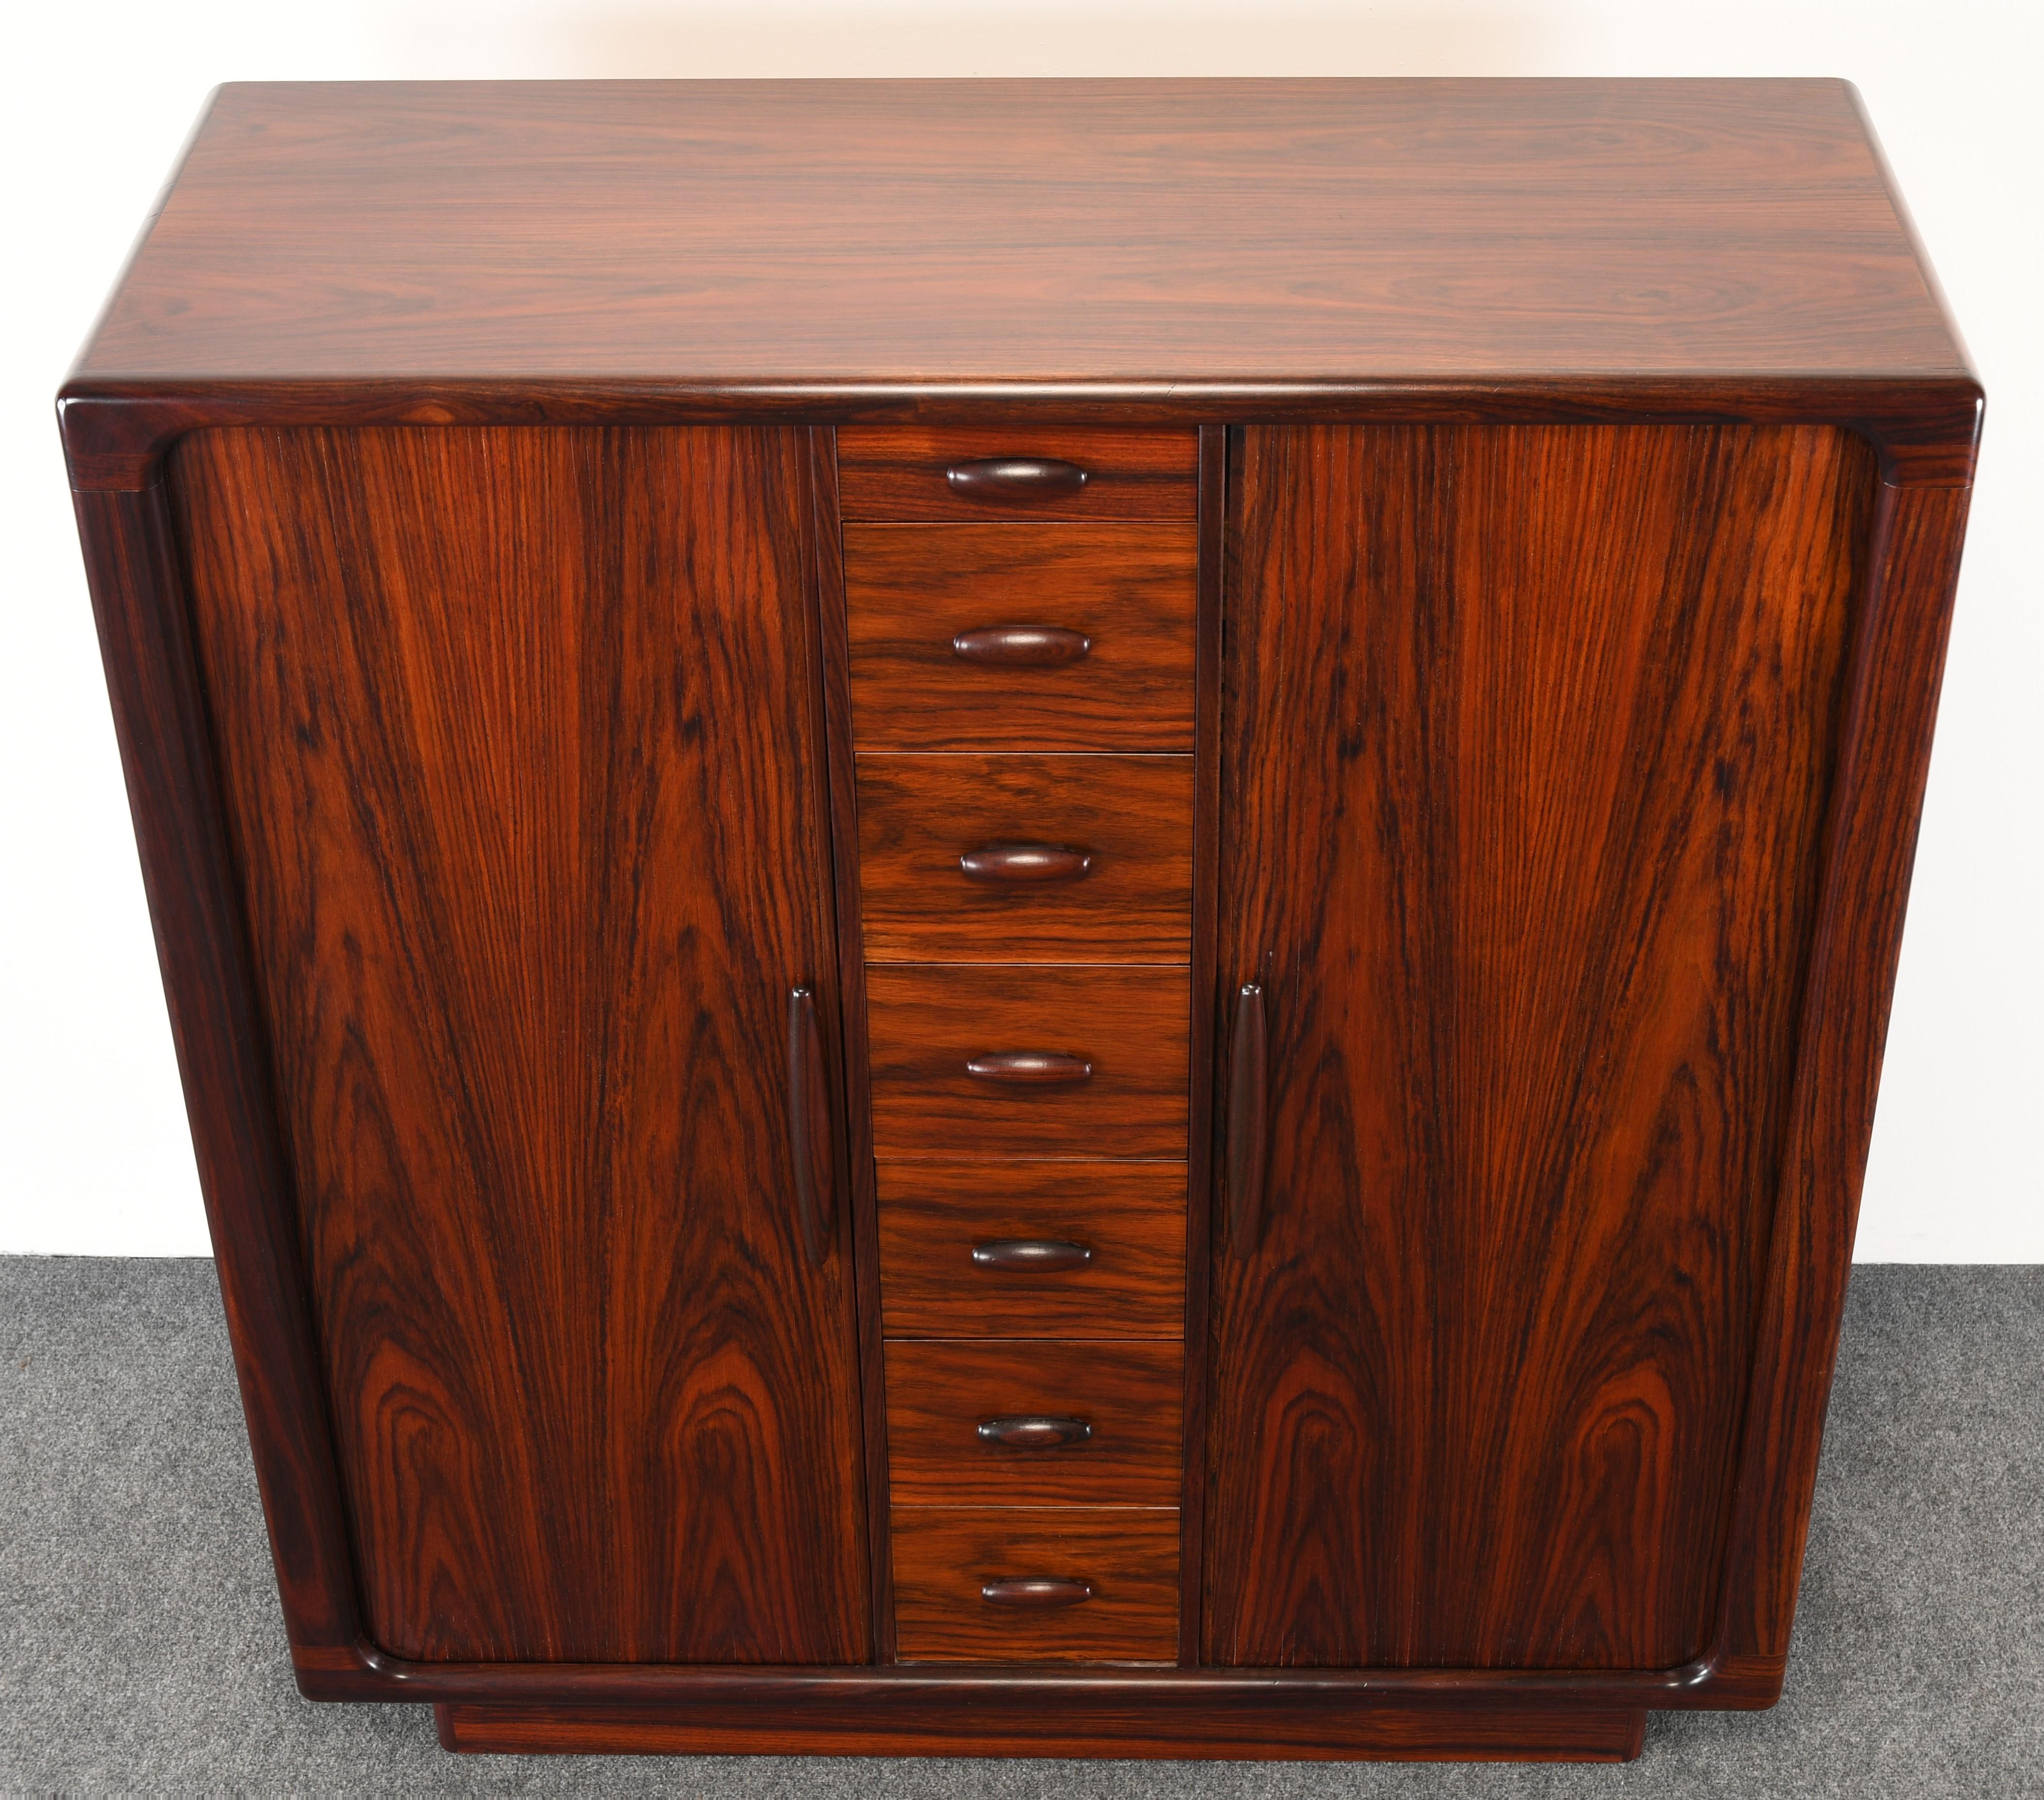 A gorgeous Danish rosewood dresser or cabinet by Dyrlund. This chest of drawers would look great in any contemporary or Mid Century Modern decor. The dresser has two tambour doors that slide beautifully and open up to reveal 14 drawers and 6 shelves